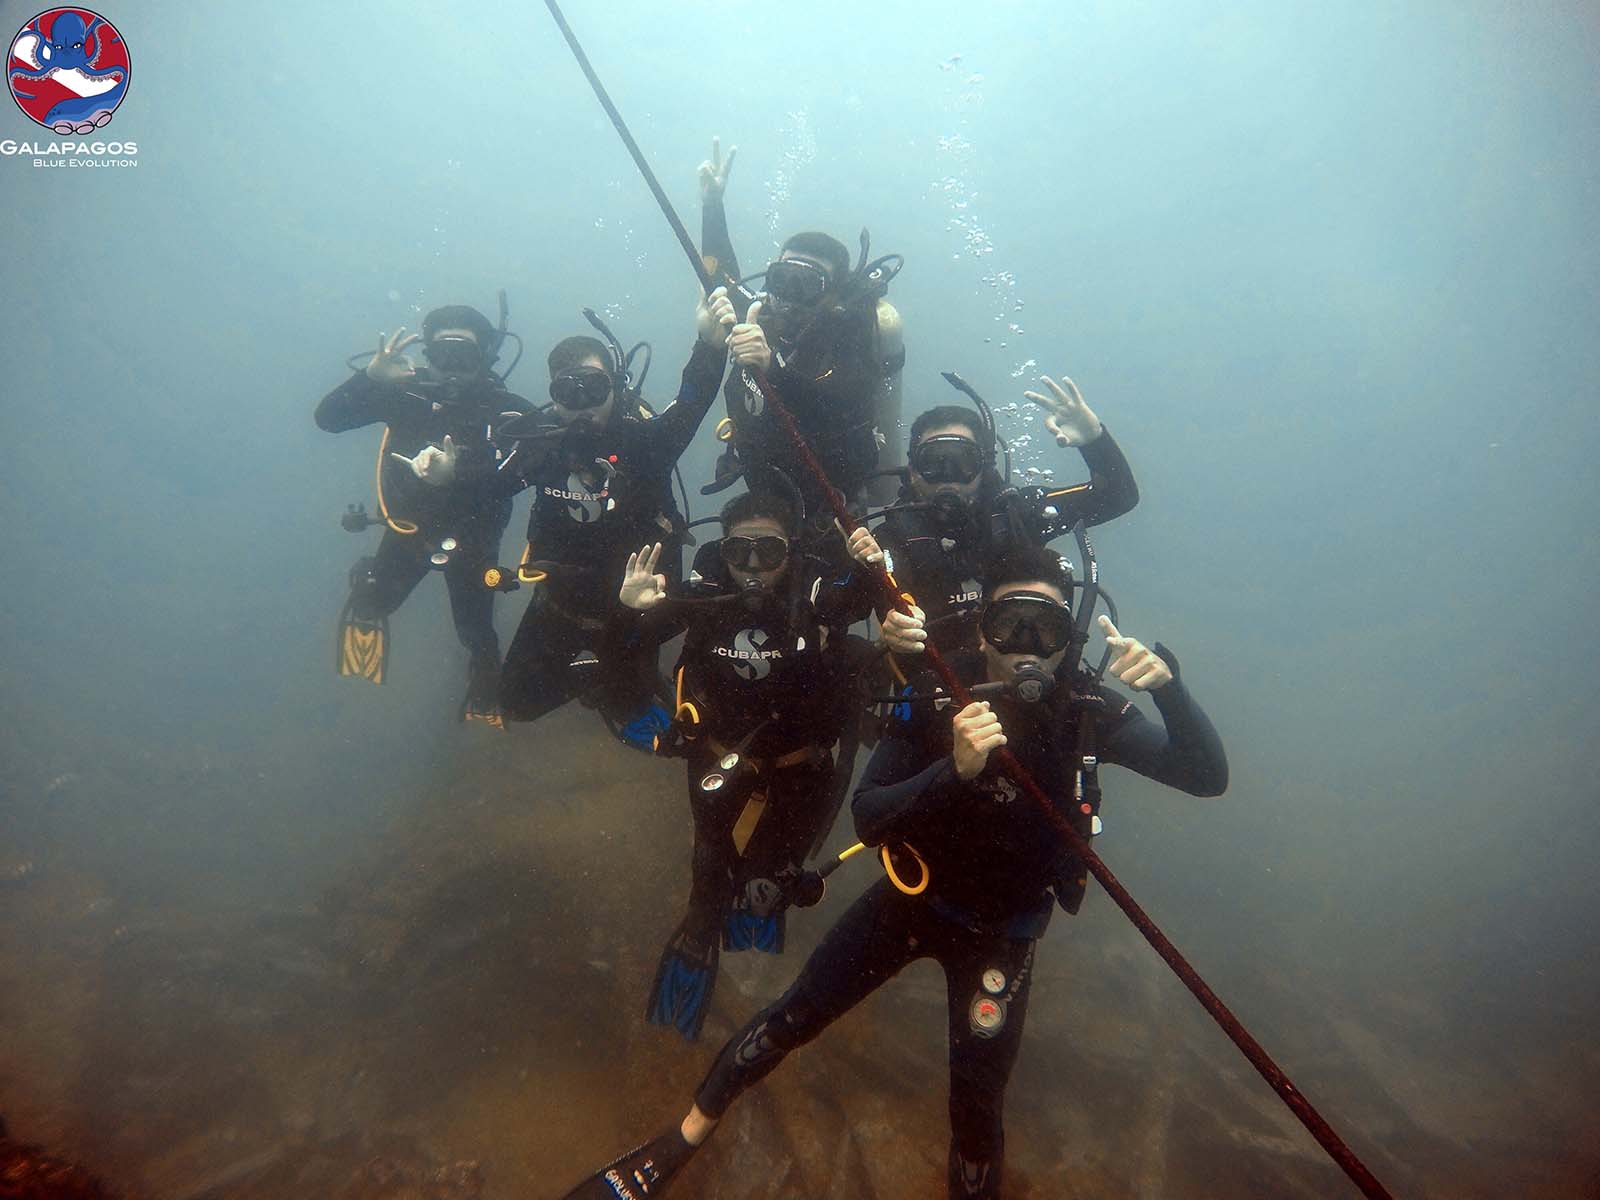 Diving courses like the Advanced Open Water Course is the perfect way to meet likeminded people.